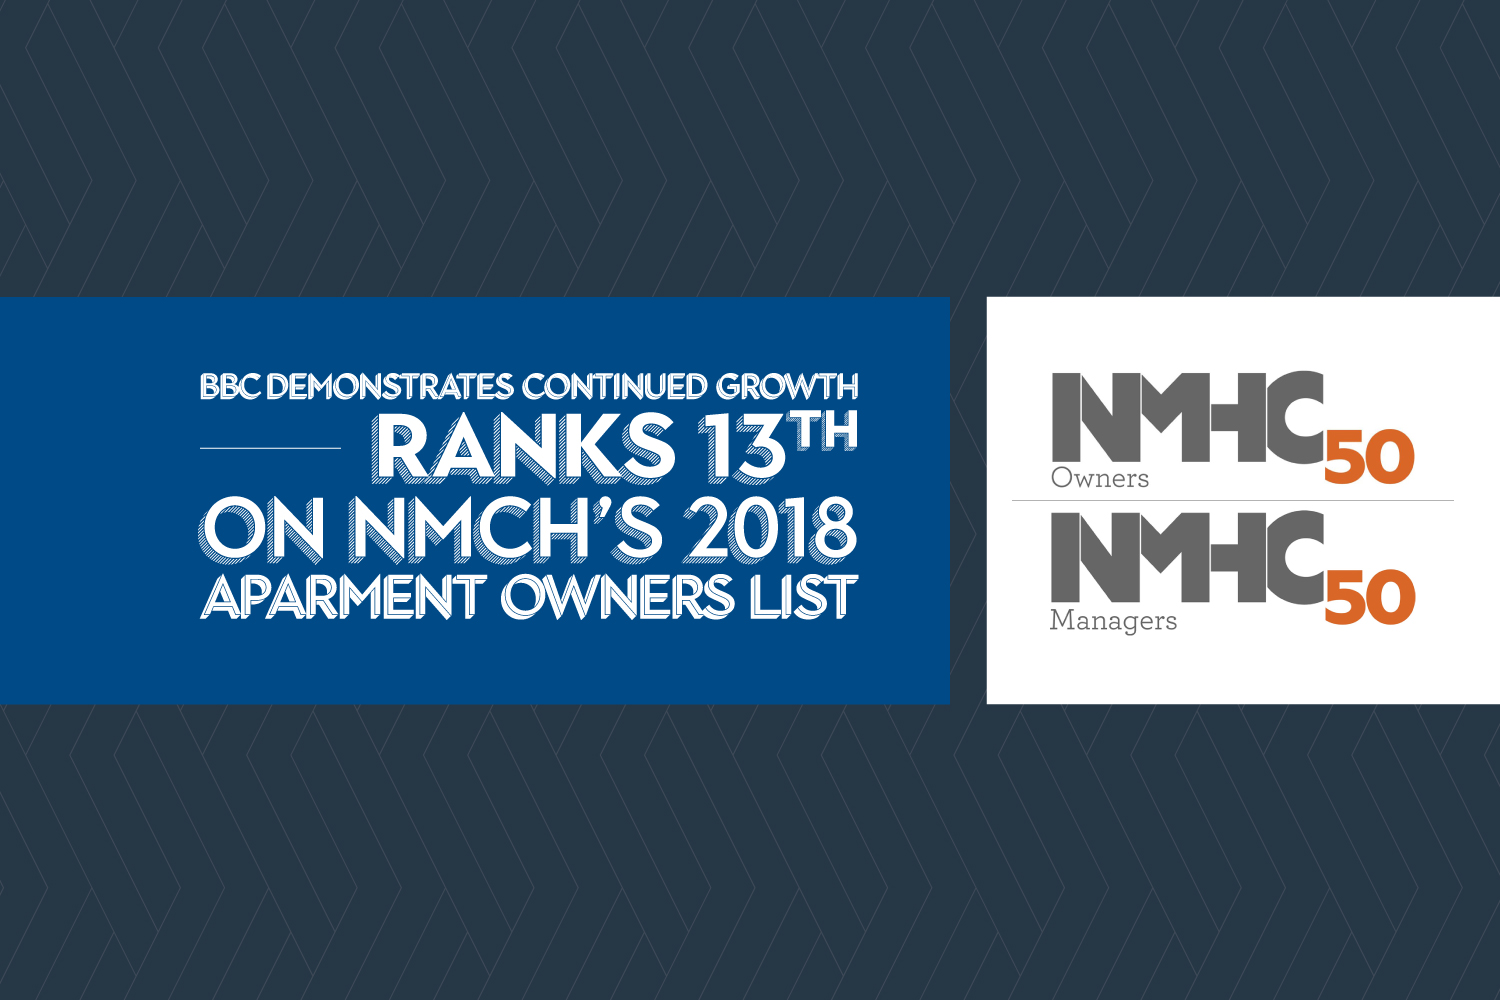 Balfour Beatty Communities demonstrates continued growth, ranks 13th on NMHC’s 2018 Top 50 Apartment Owners List